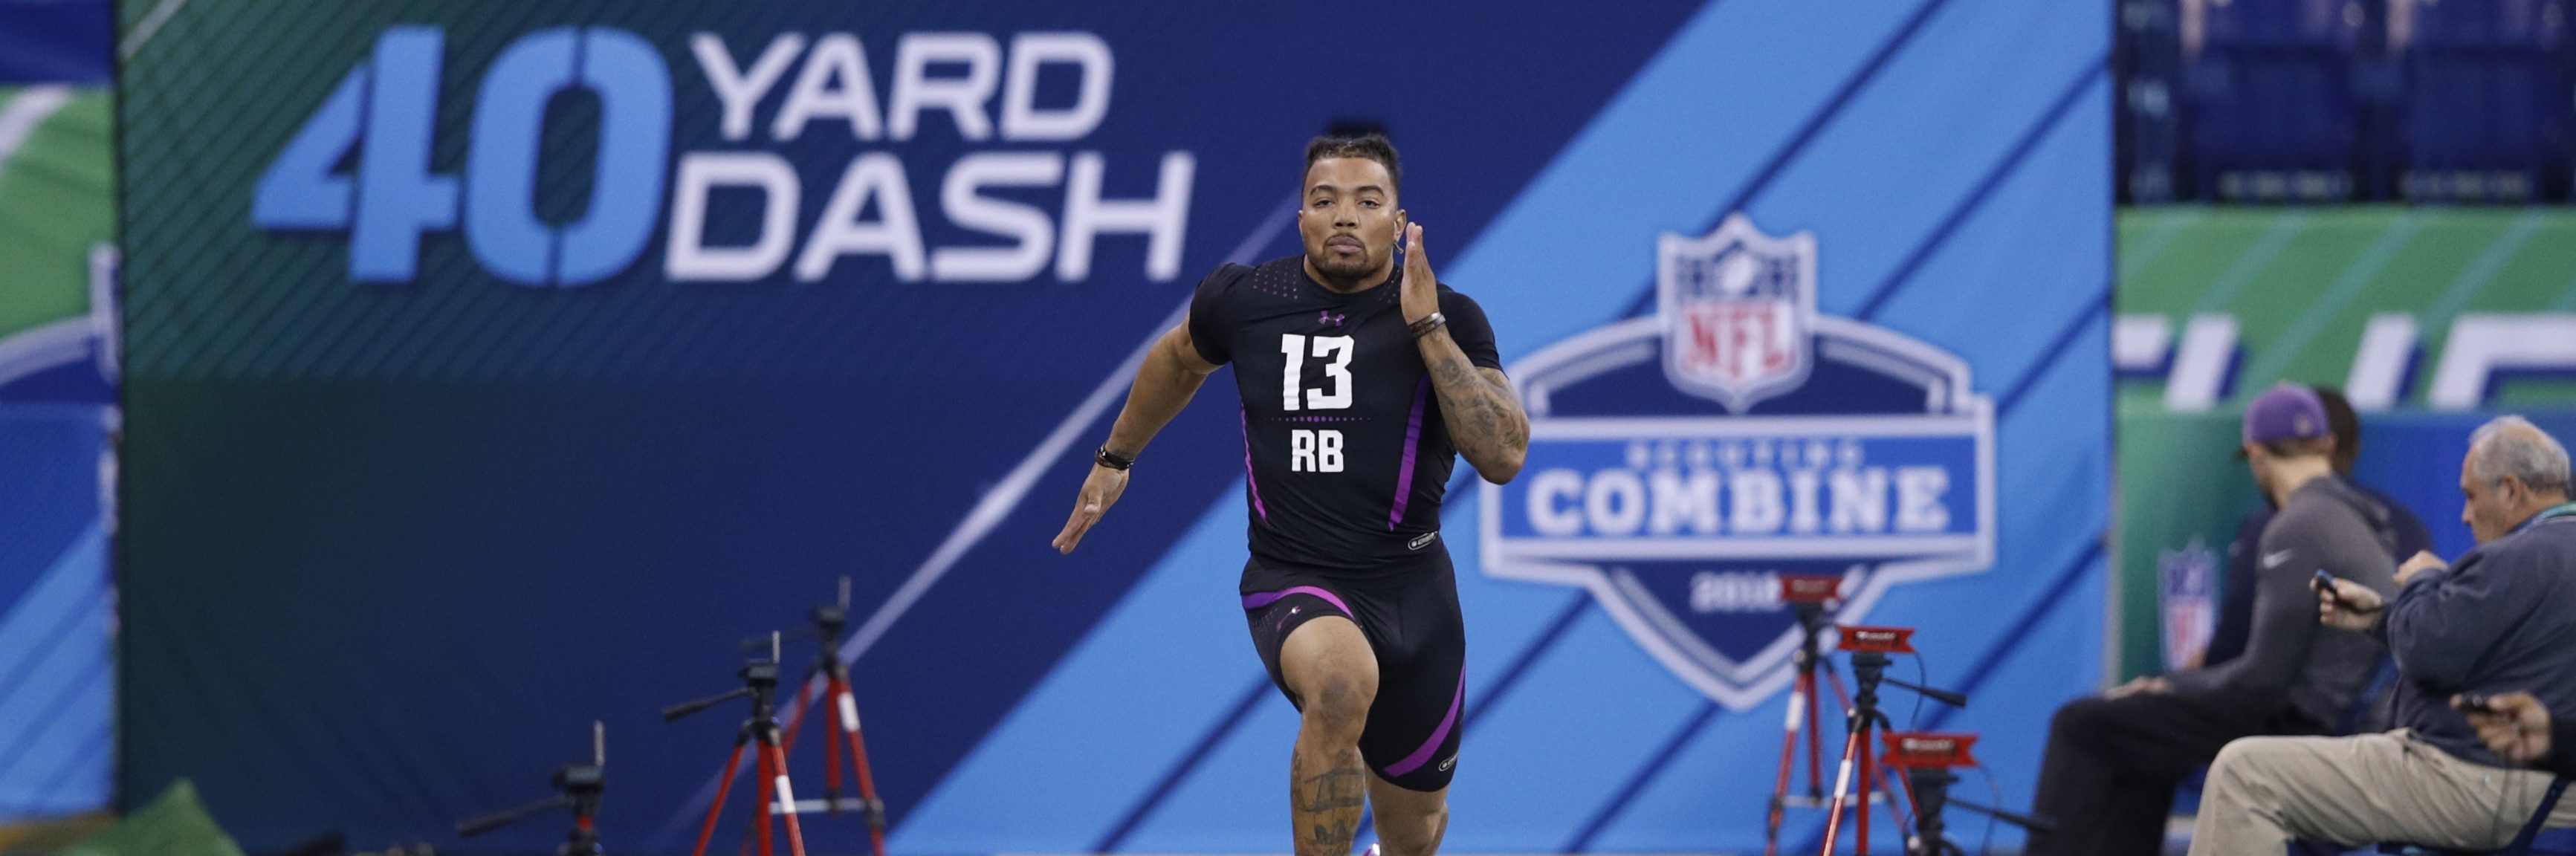 LSU running back Derrius Guice runs the 40-yard dash during the 2018 NFL Combine. (Photo by Joe Robbins/Getty Images)